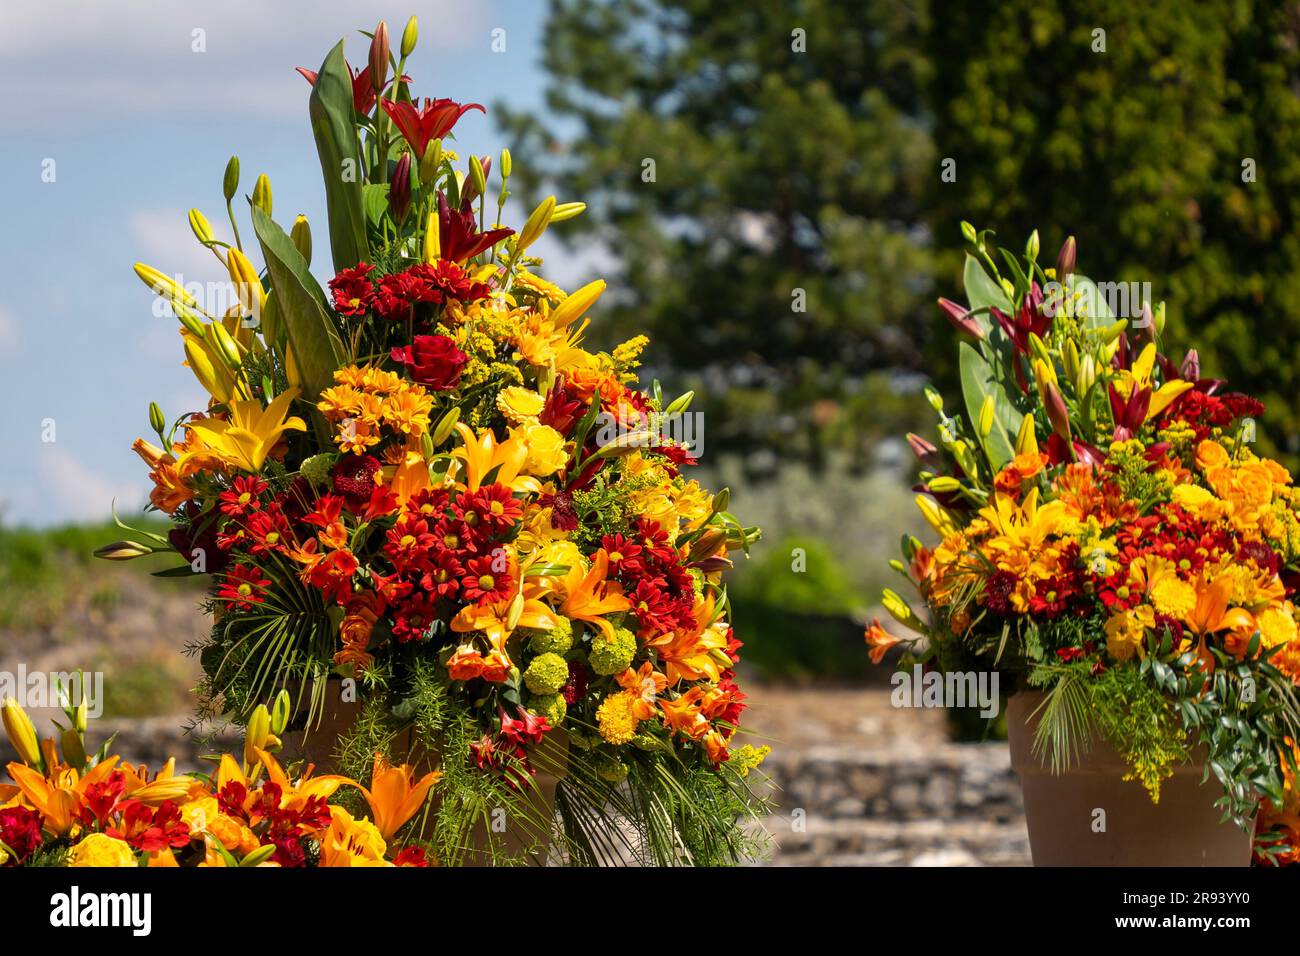 Large colorful outdoor bouquet of several different beautiful flowers Stock Photo